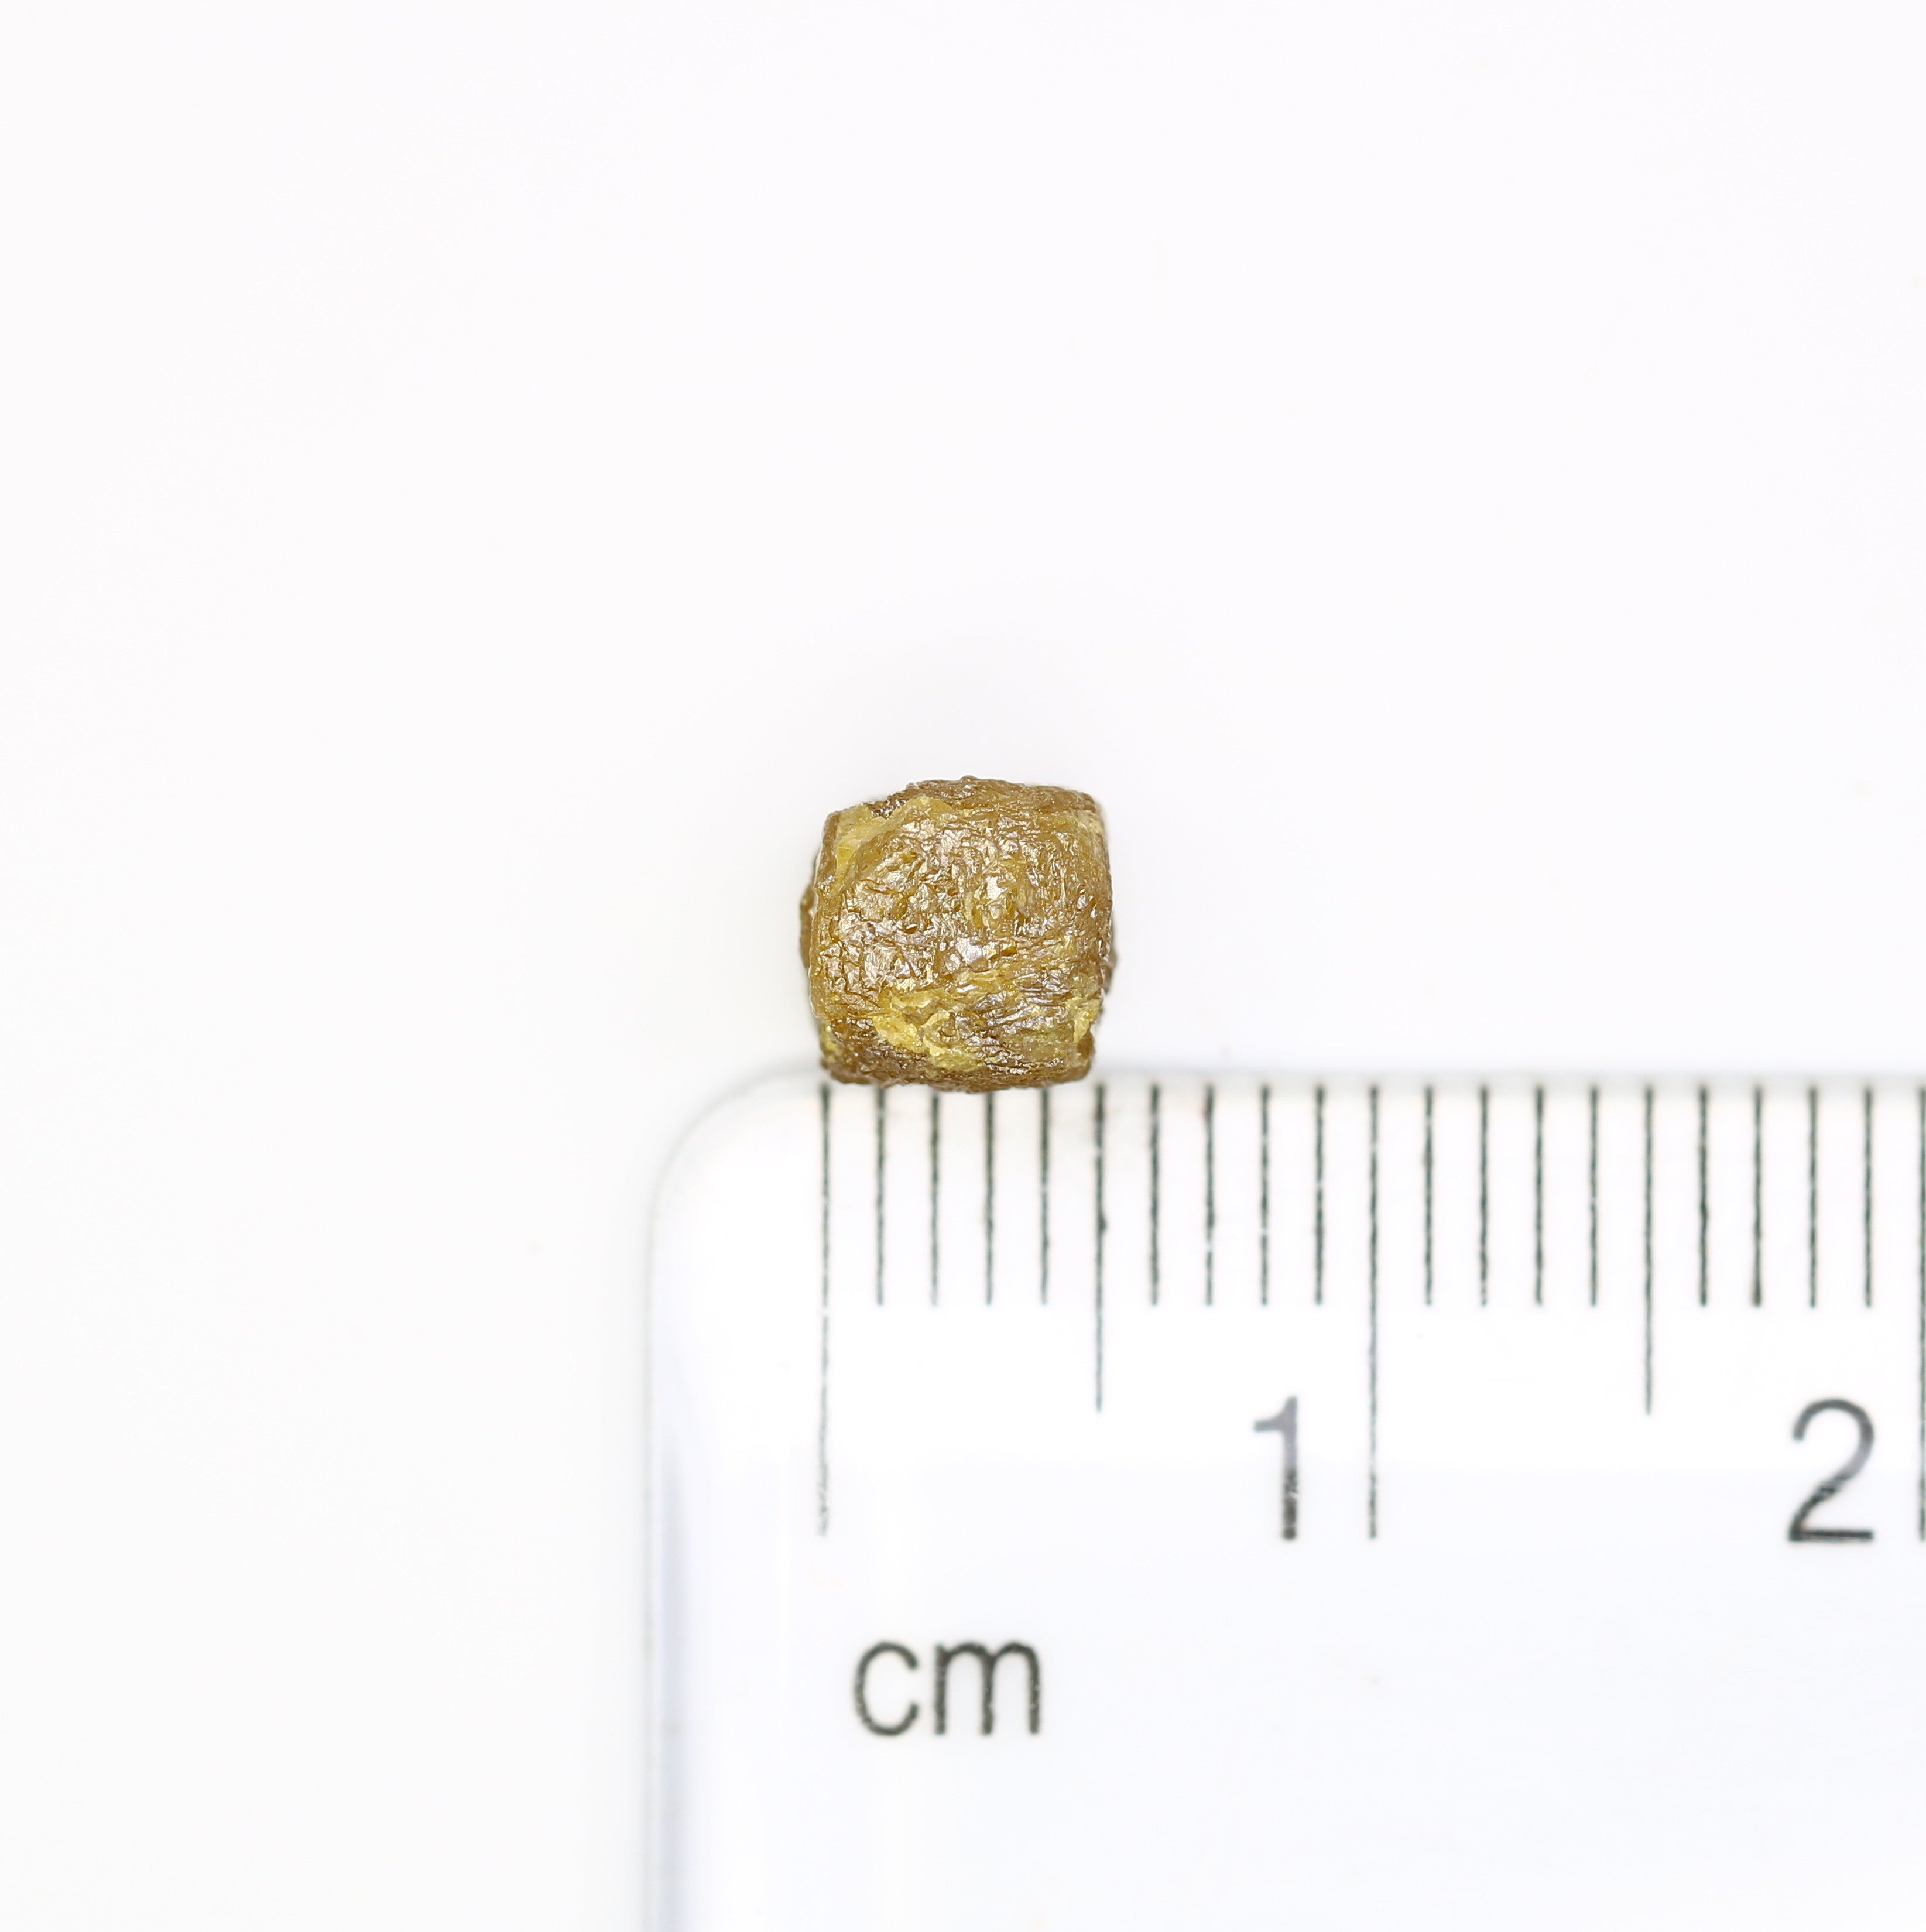 2.33 Carat Natural Loose Yellow Color Congo Cube Rough Diamond For Diamond Jewelry